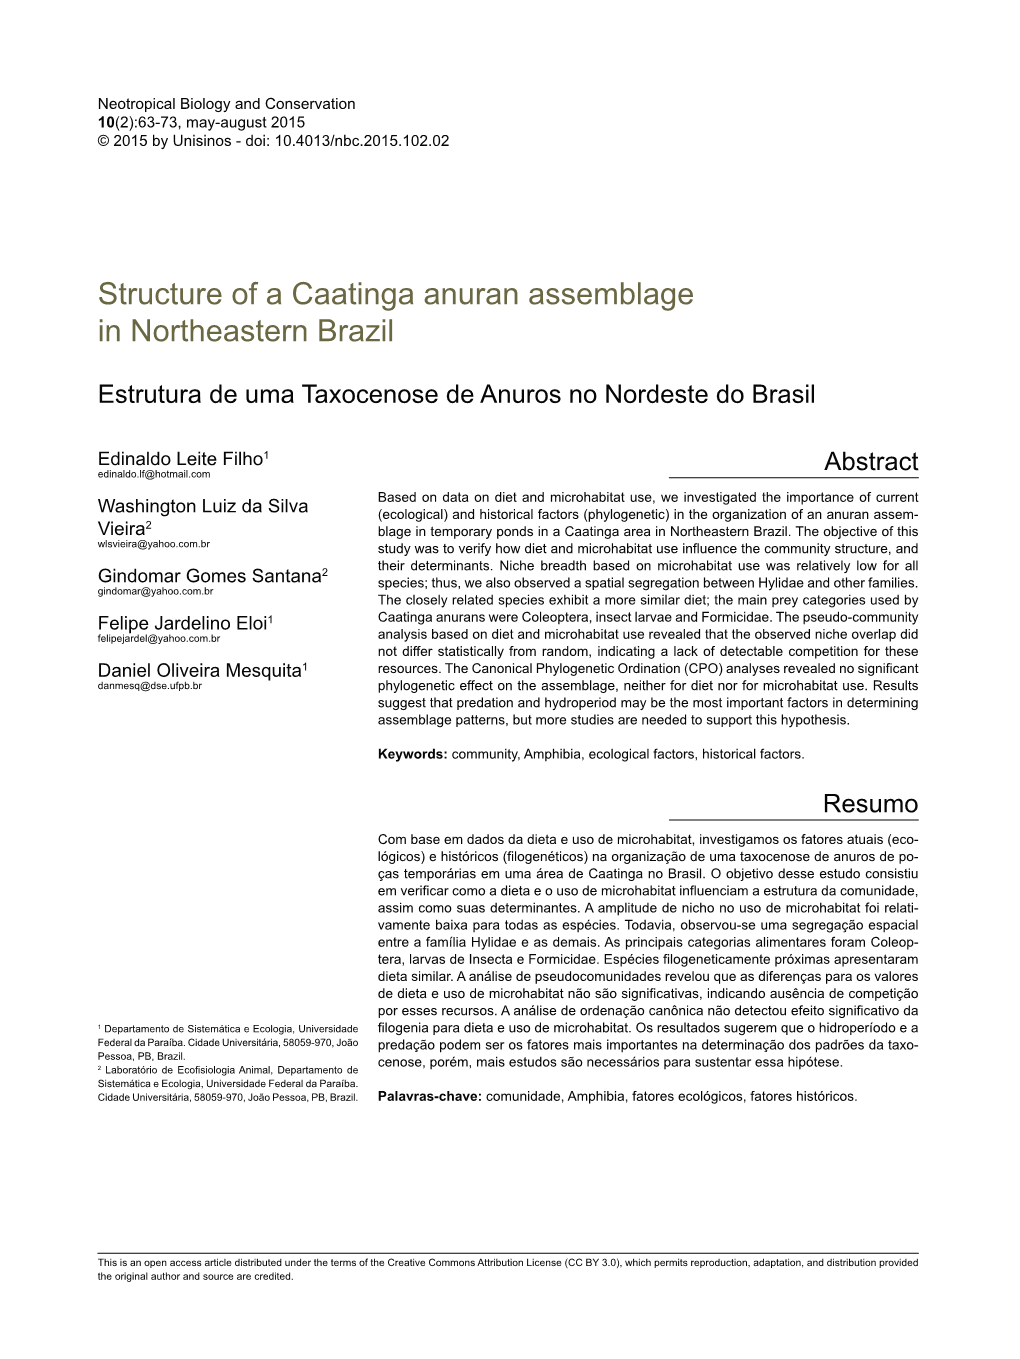 Structure of a Caatinga Anuran Assemblage in Northeastern Brazil